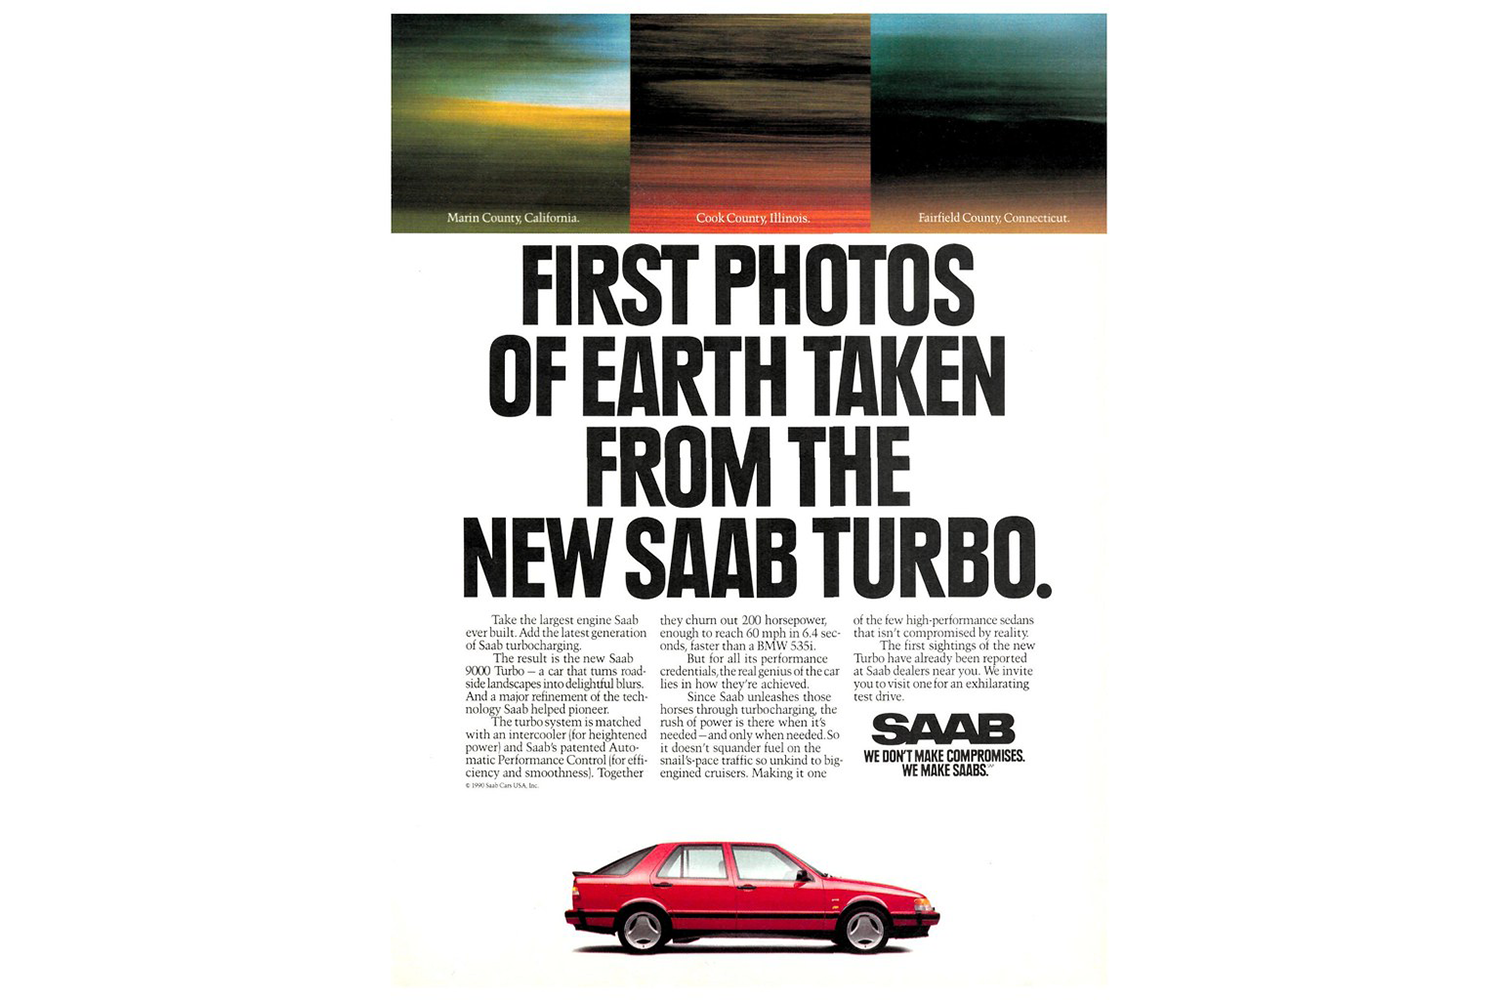 A magazine advertisement for the Saab 9000 Turbo